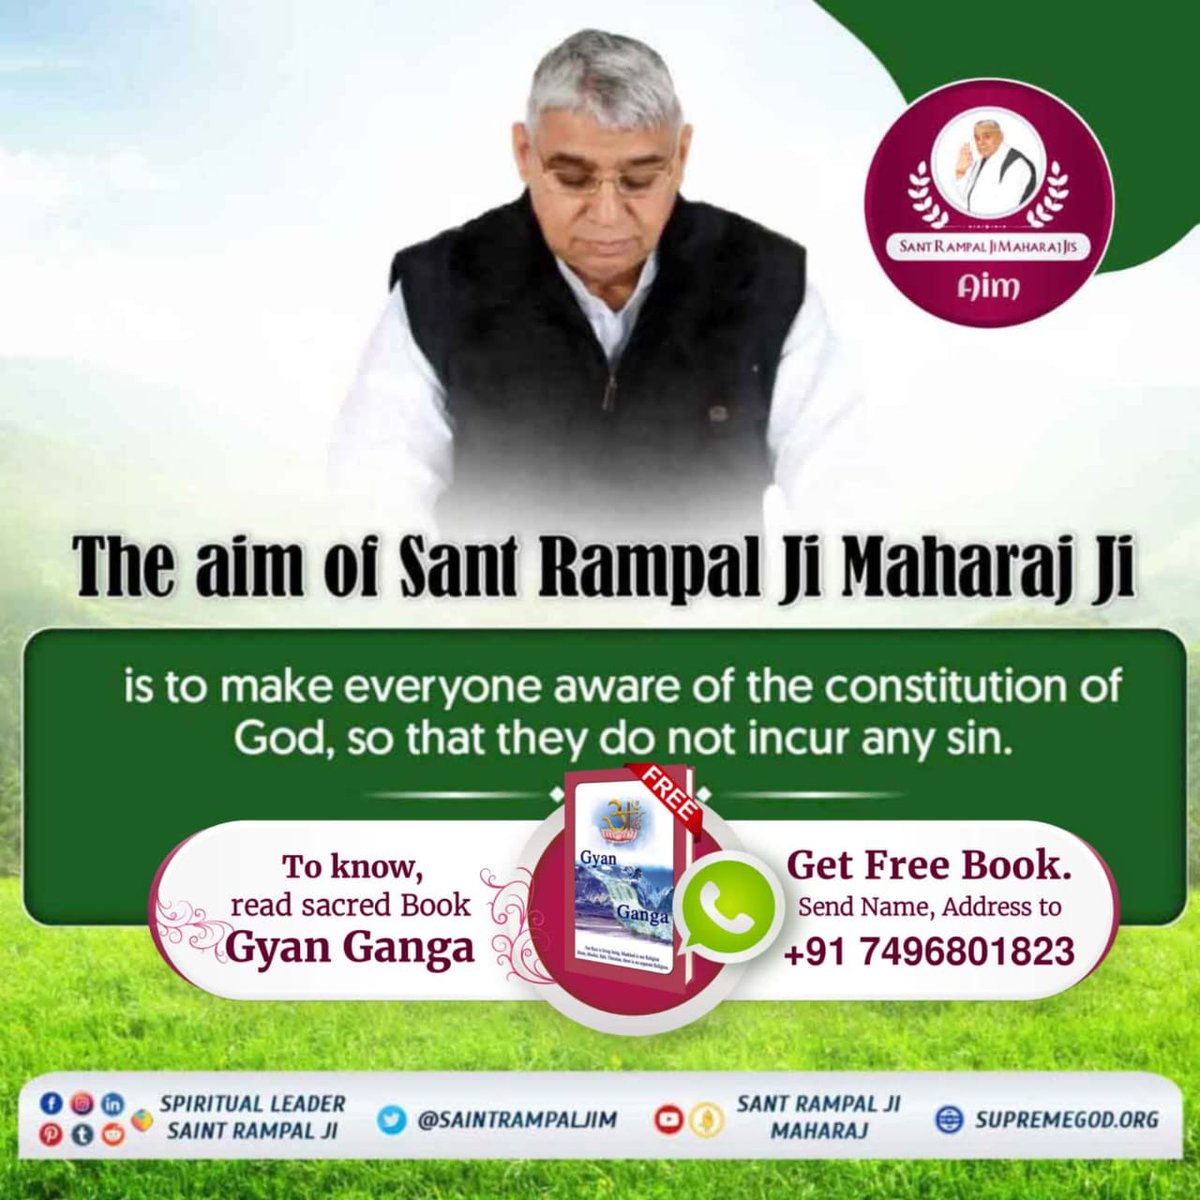 #GodNightMonday The aim of Sant Rampal Ji Maharaj Ji is to make everyone aware of the constitution of God, so that they do not incur any sin.